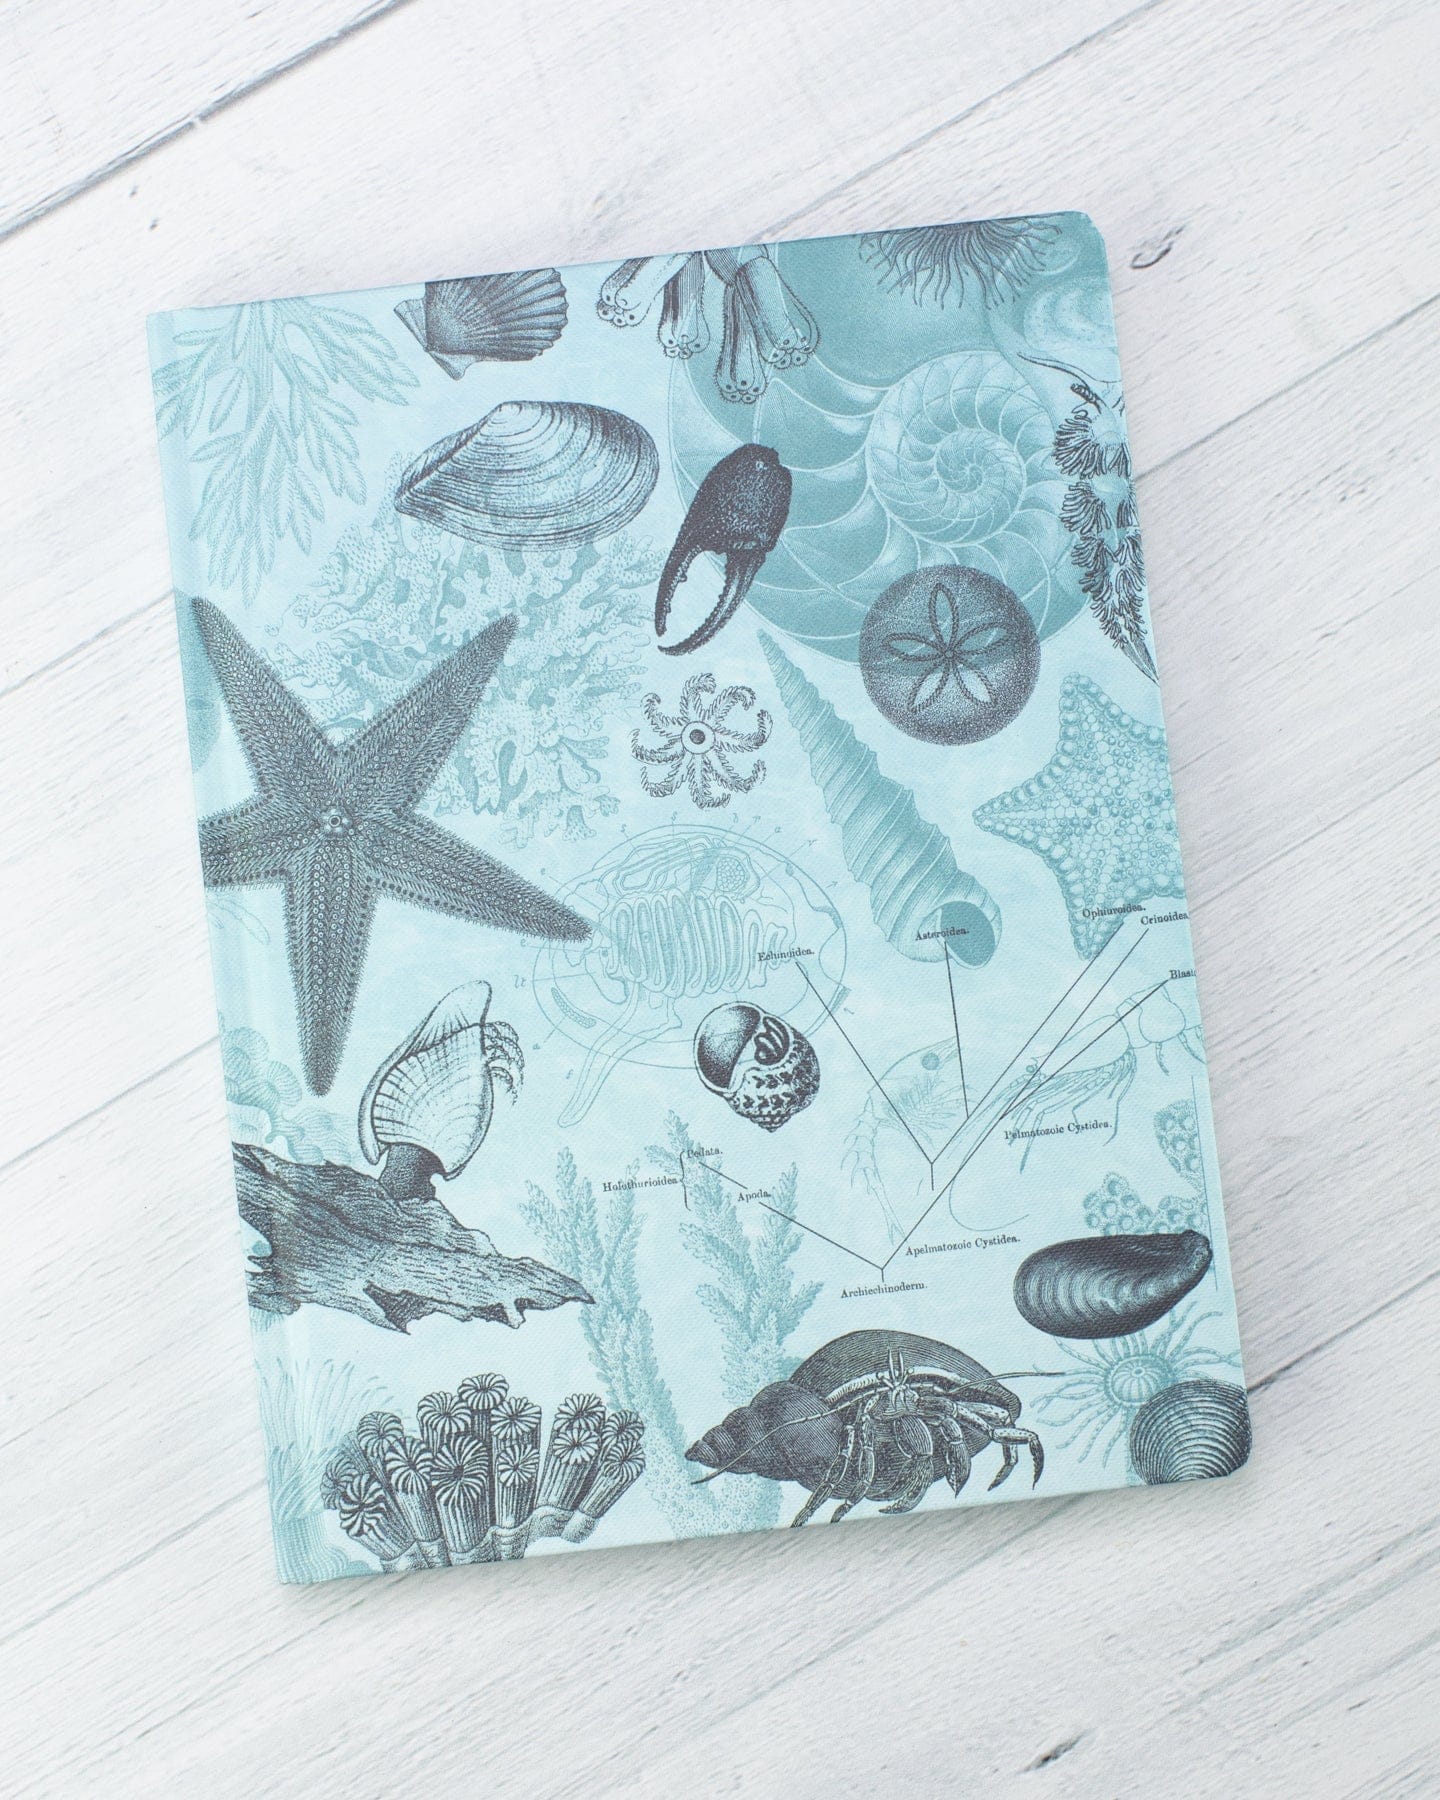 Shallow Seas Hardcover - Lined/Grid Cognitive Surplus